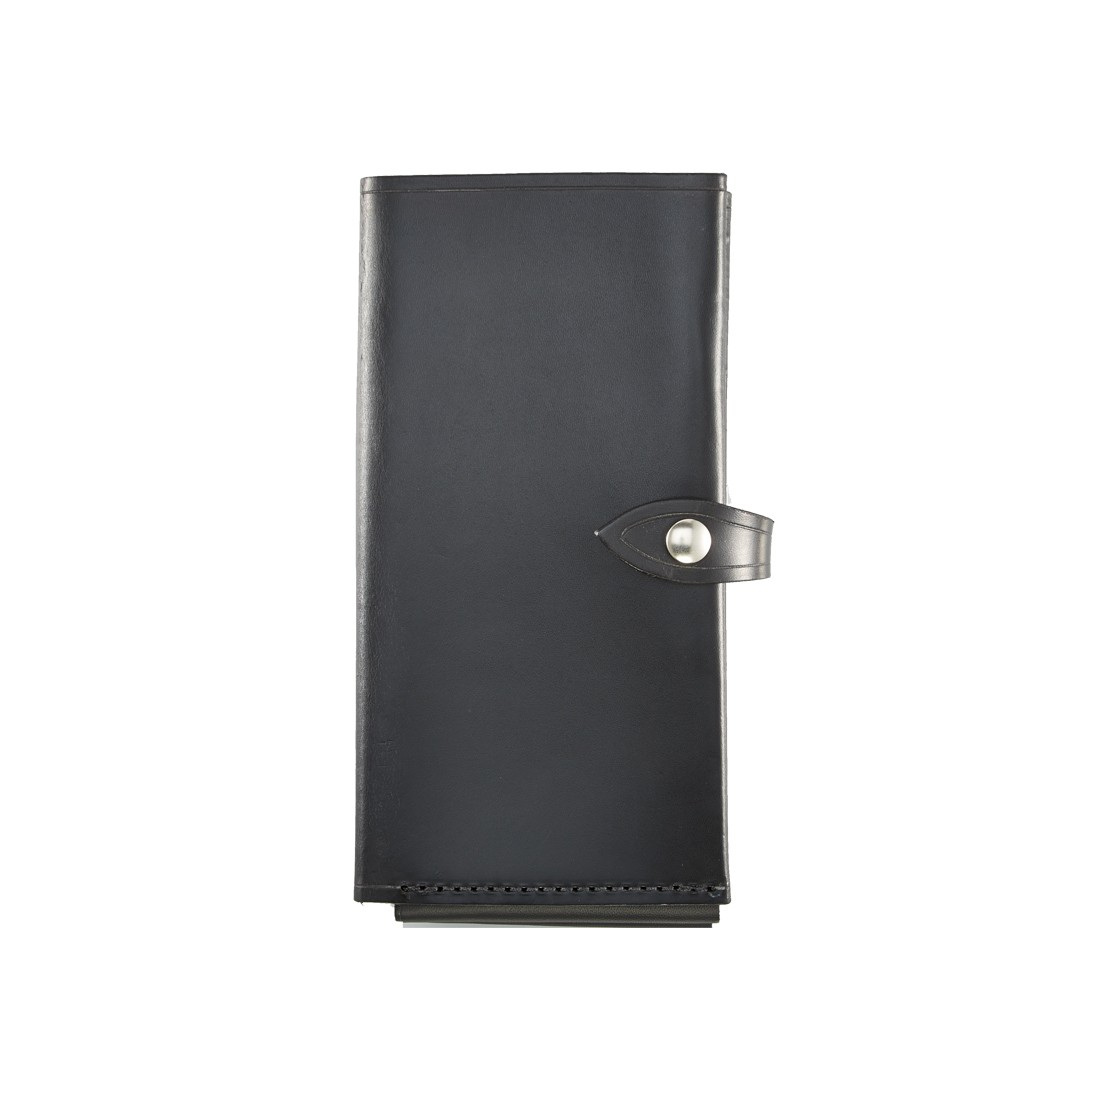 BLACK LEATHER DOUBLE CITATION BOOK WITH 2 CLIPS 